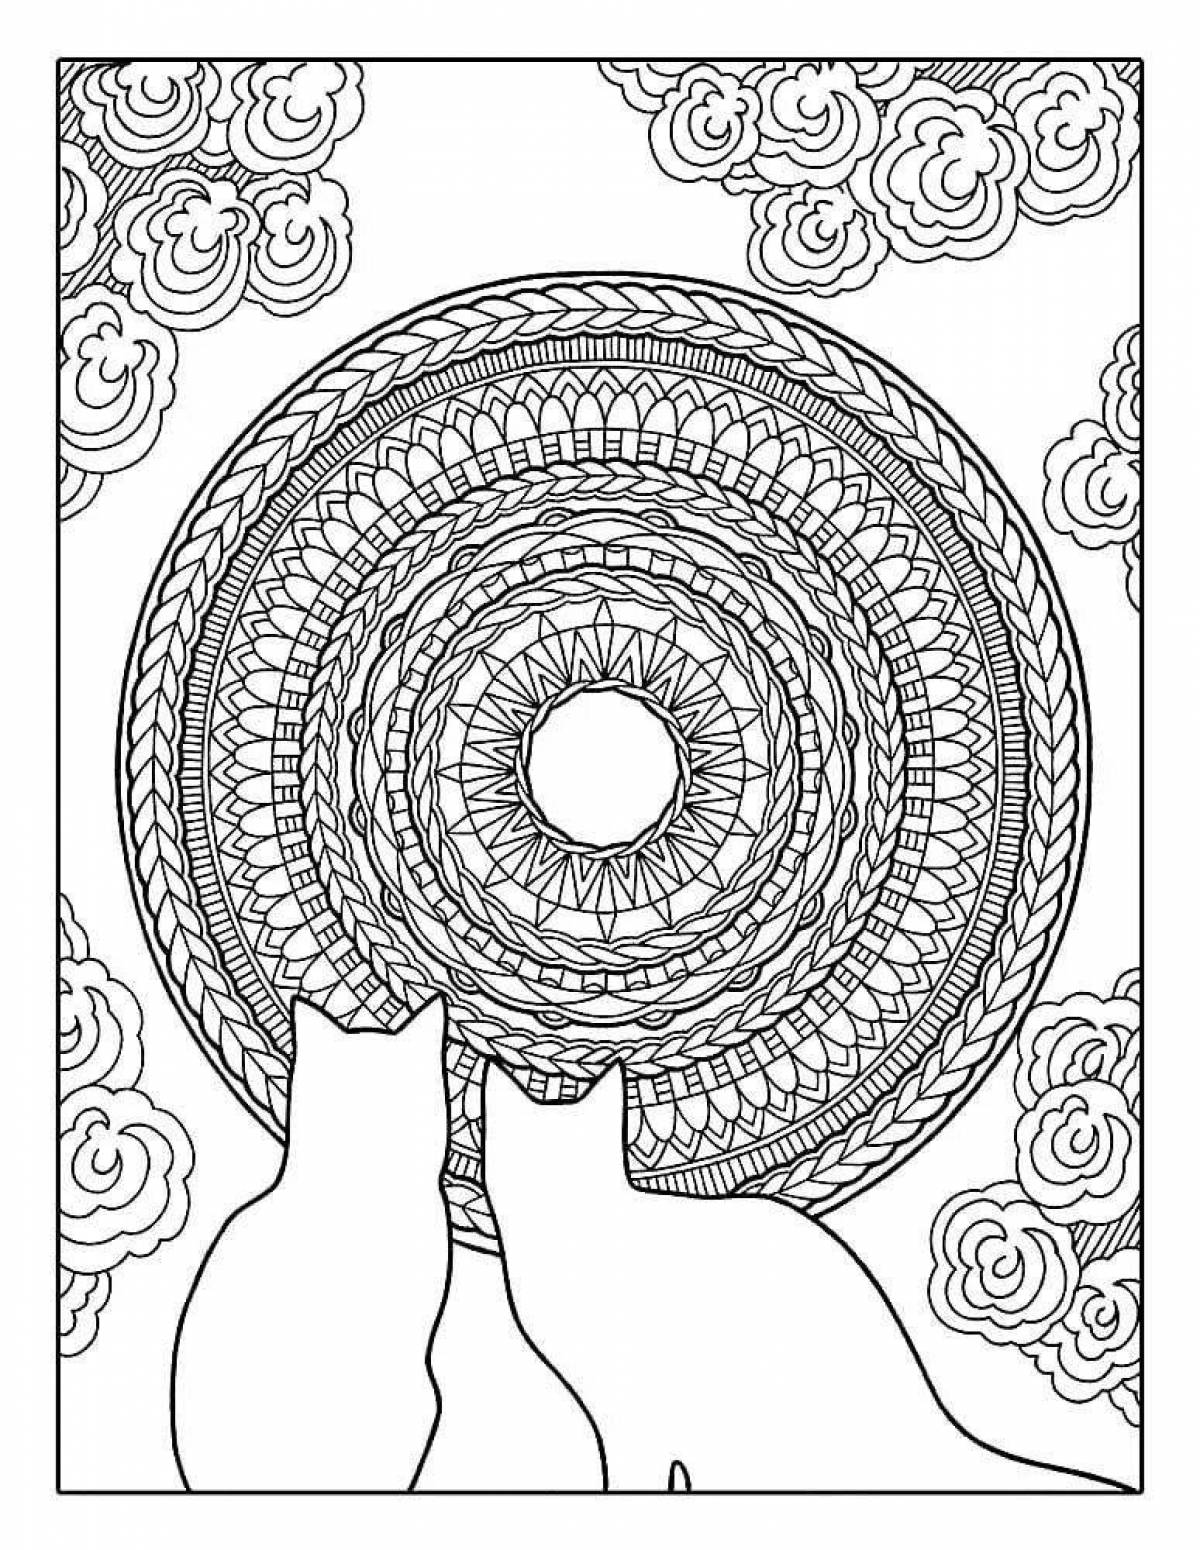 Intriguing zendoodle coloring book